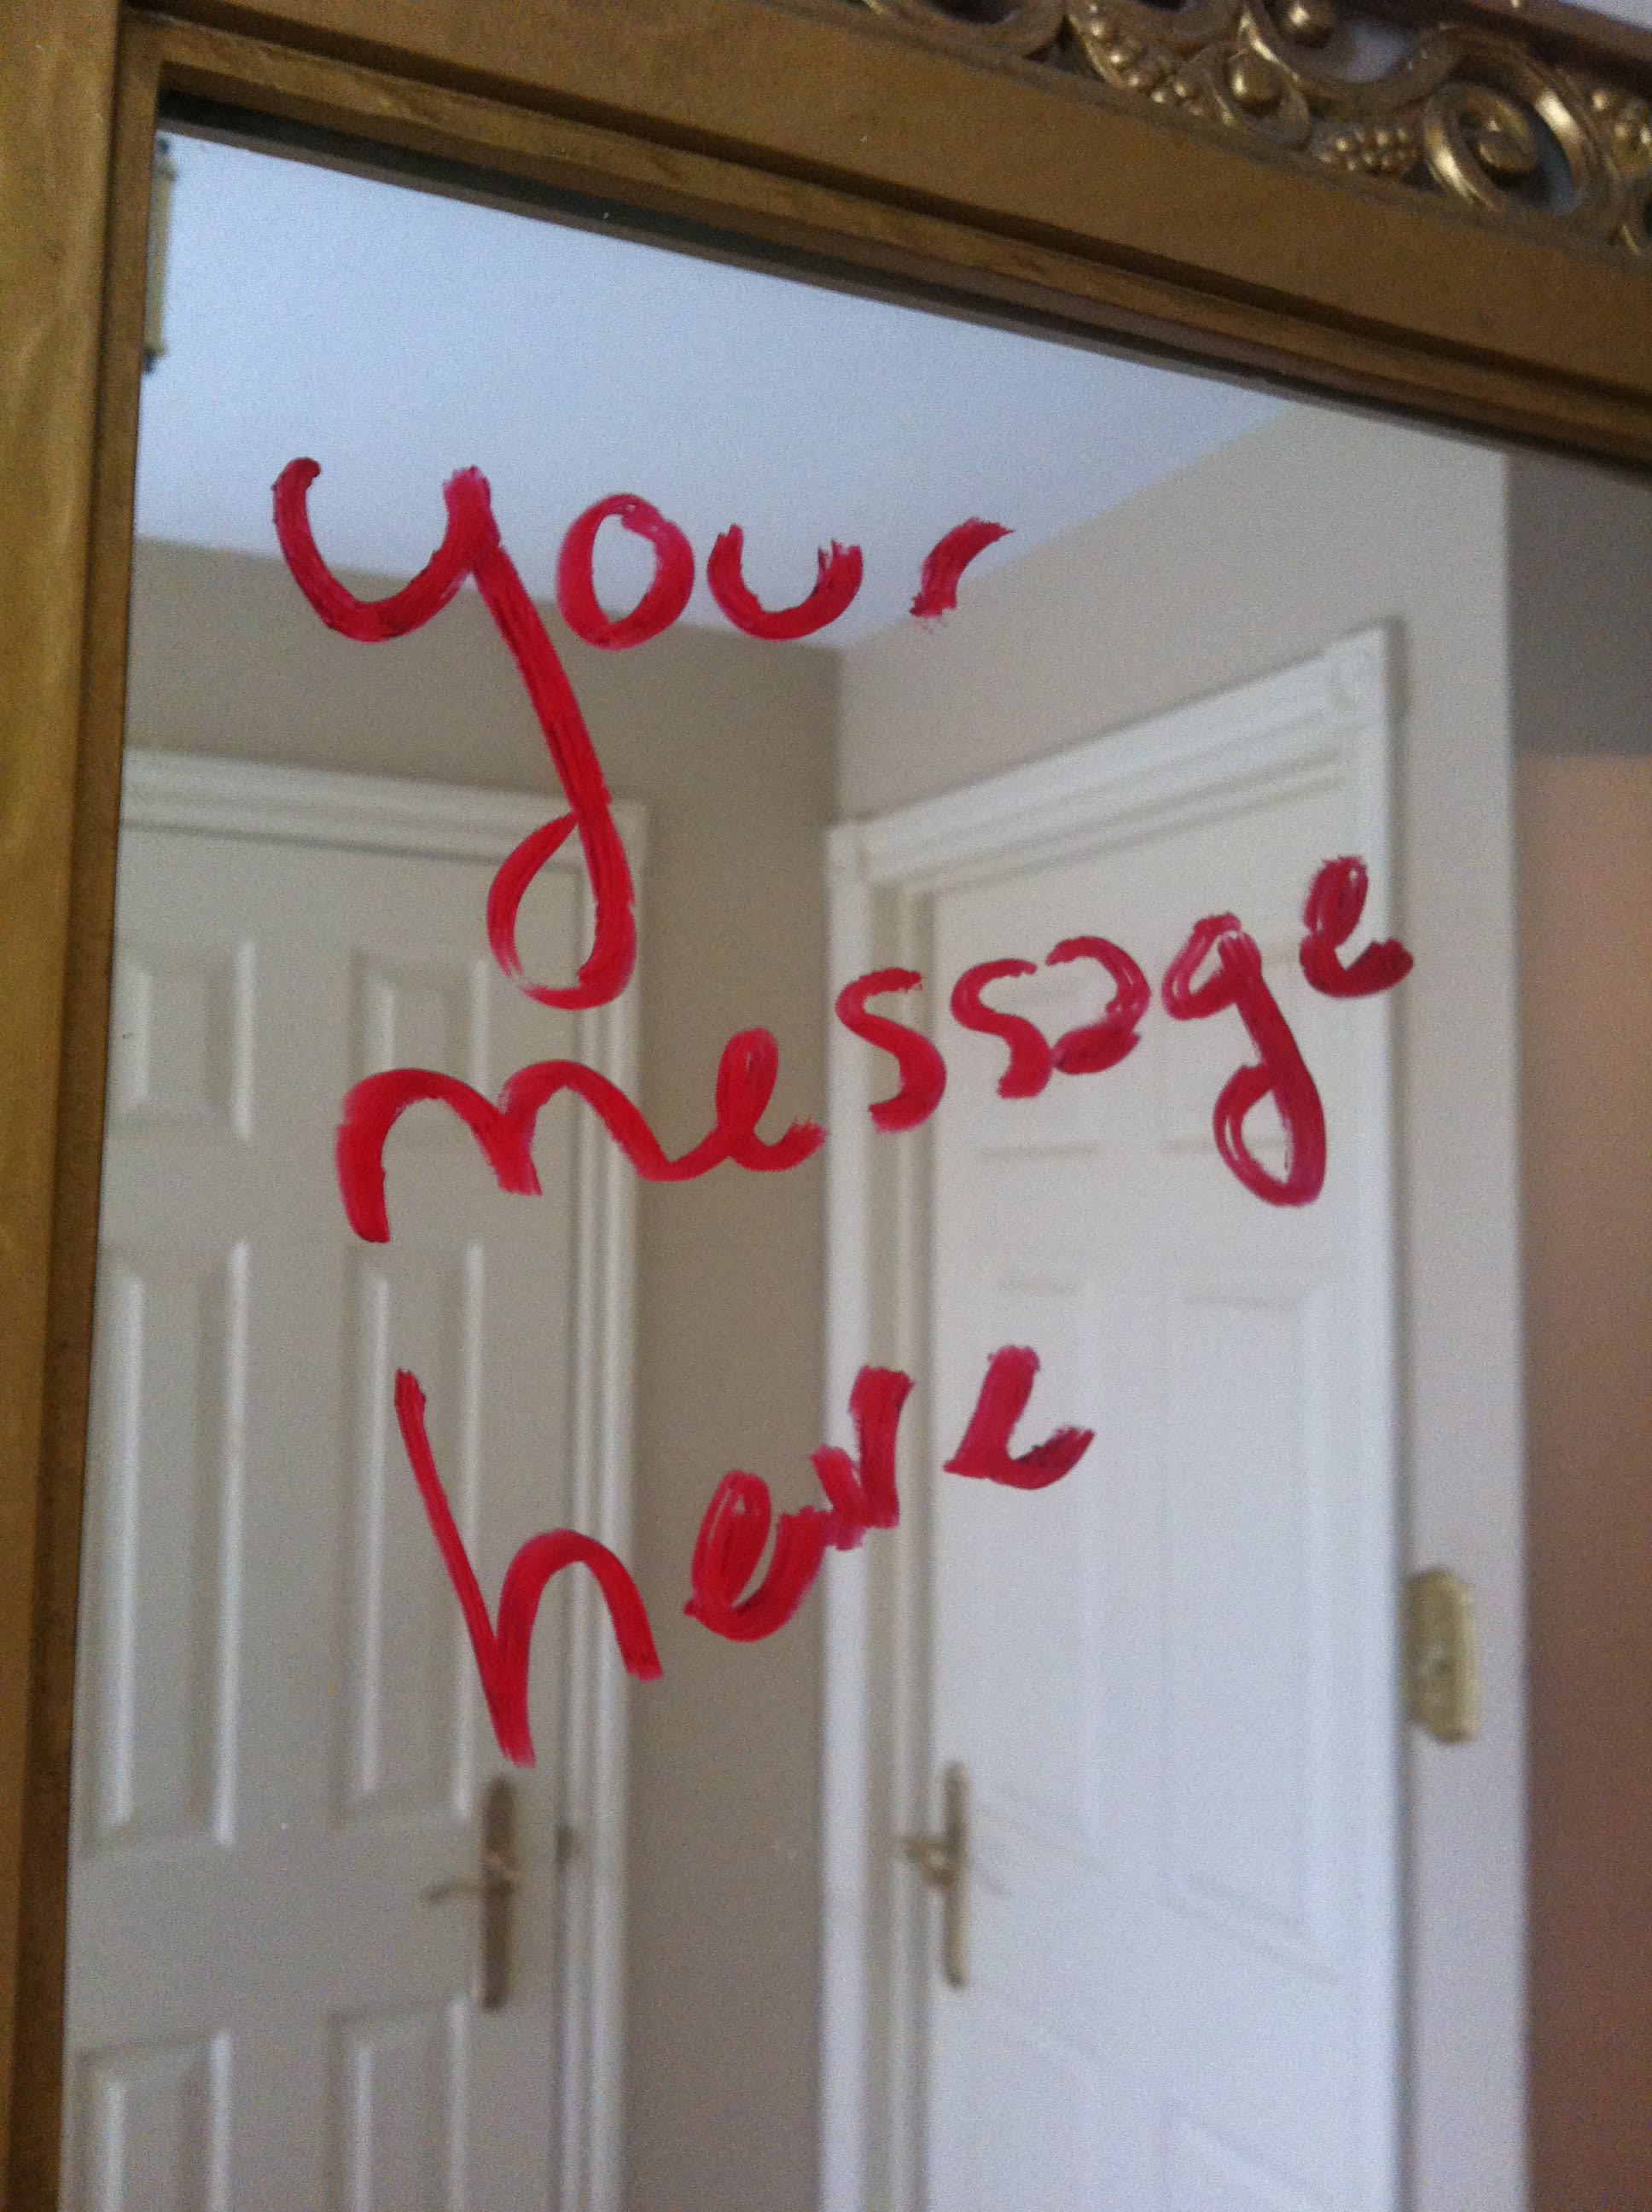 Write your message in lipstick on my mirror by Vegancheese  Fiverr